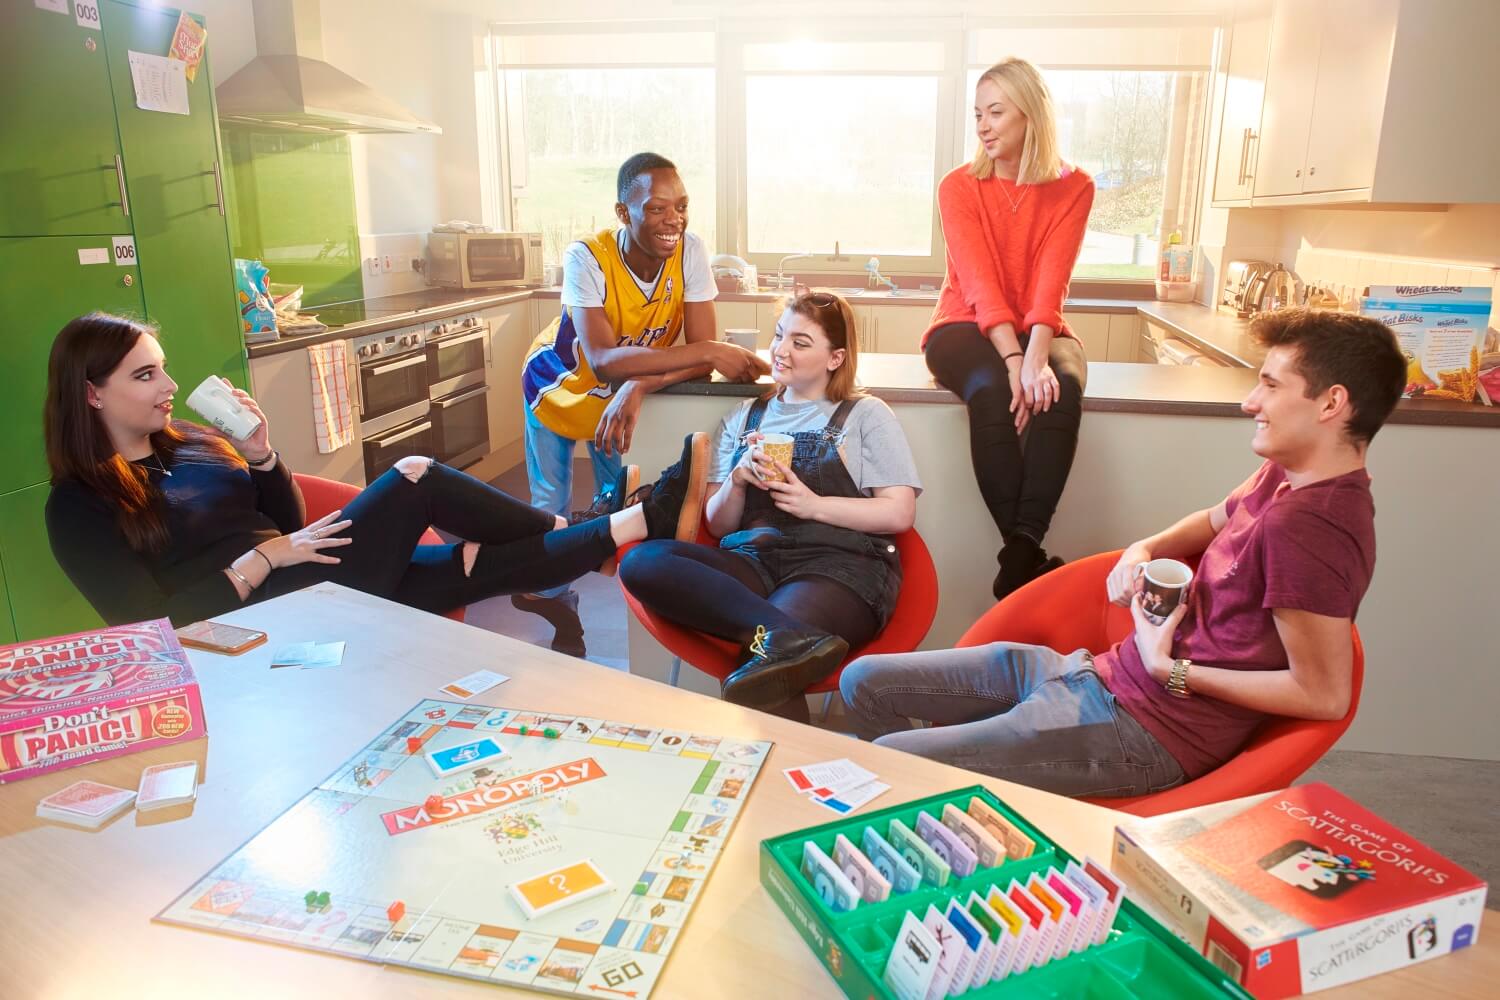 Accommodation - Five students chat in the kitchen and communal area of a halls of residence while drinking from mugs, with Monopoly and other board games on the table alongside them.